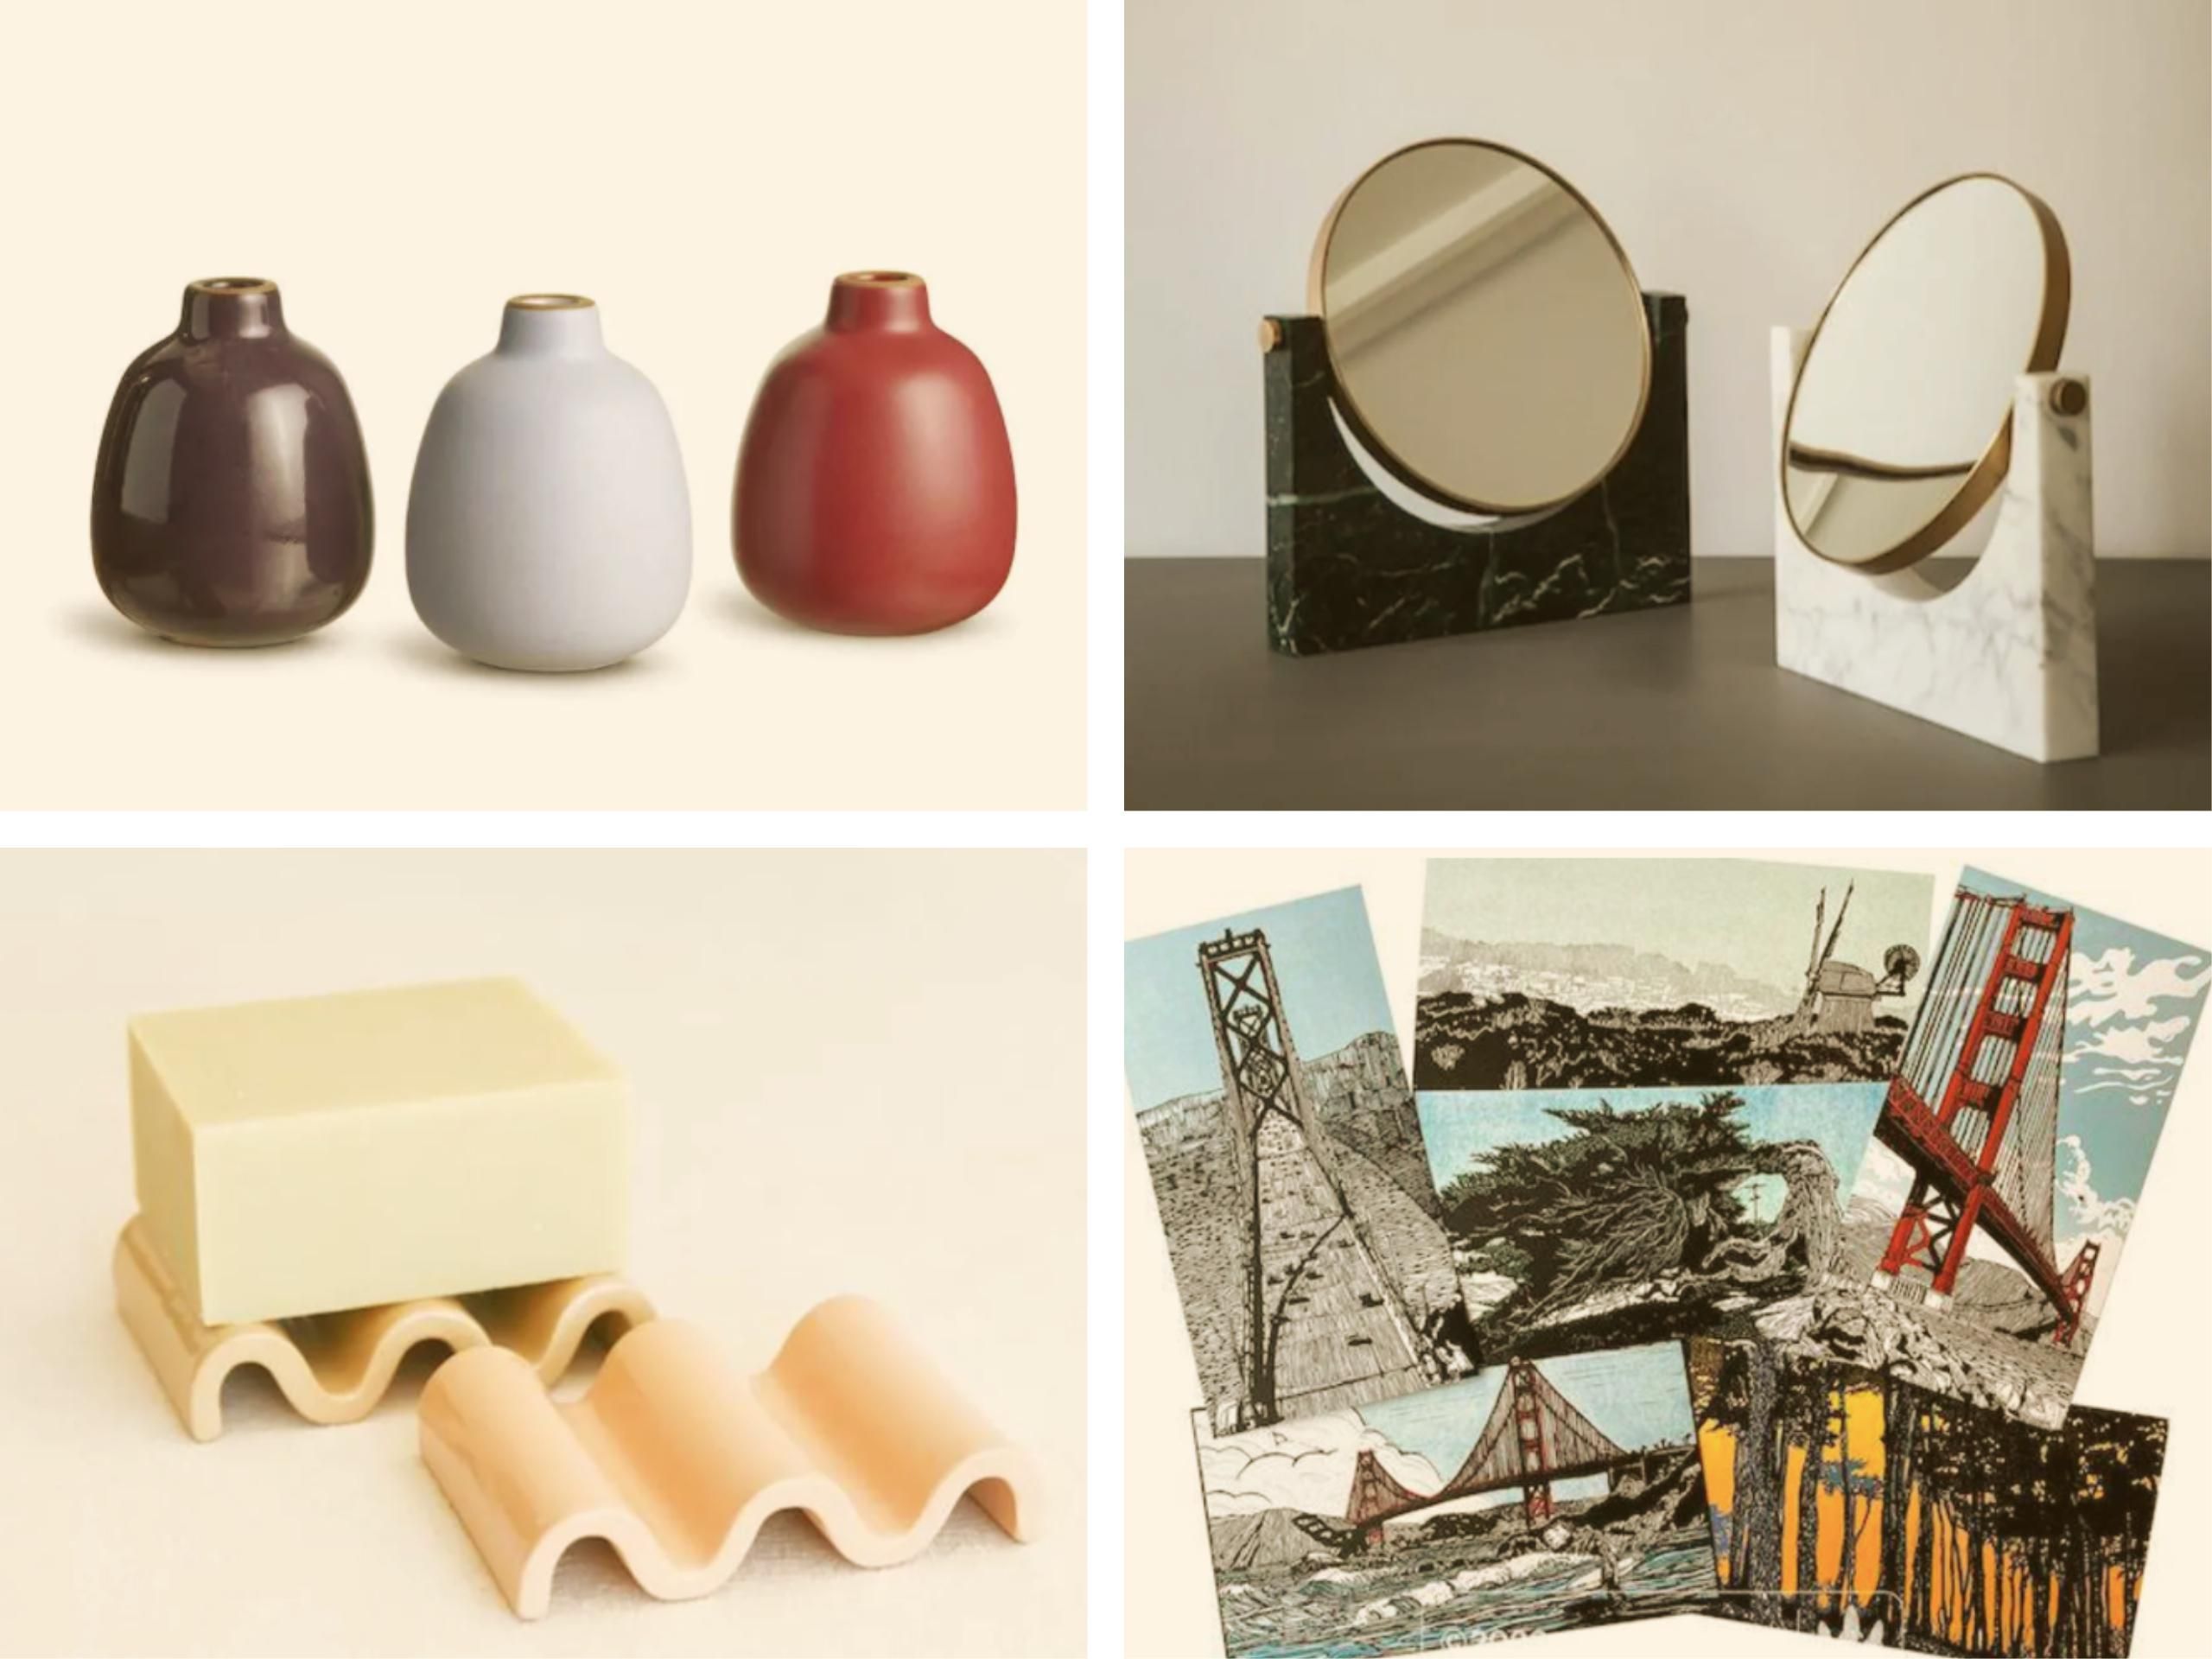 Good-Looking Holiday Gifts for Bay Area Design Junkies